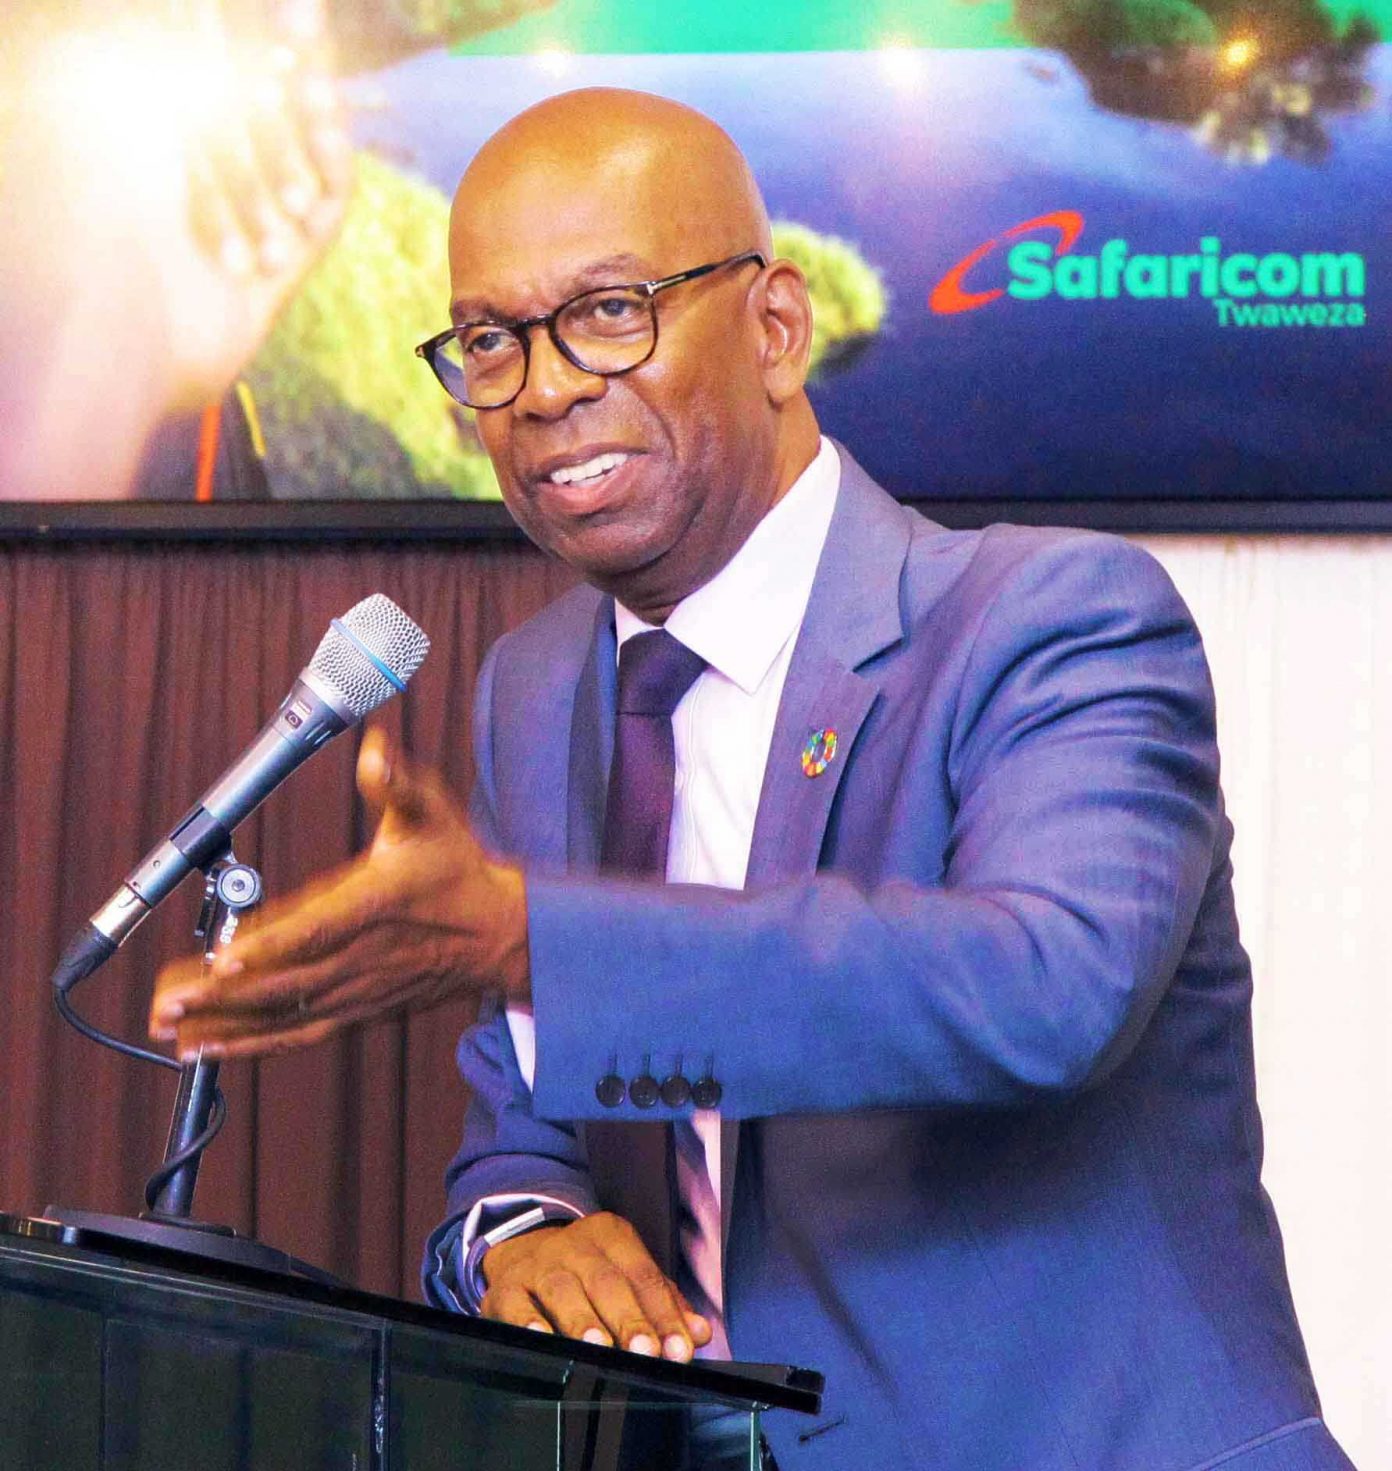 Safaricom recognized in Change the World List of Companies